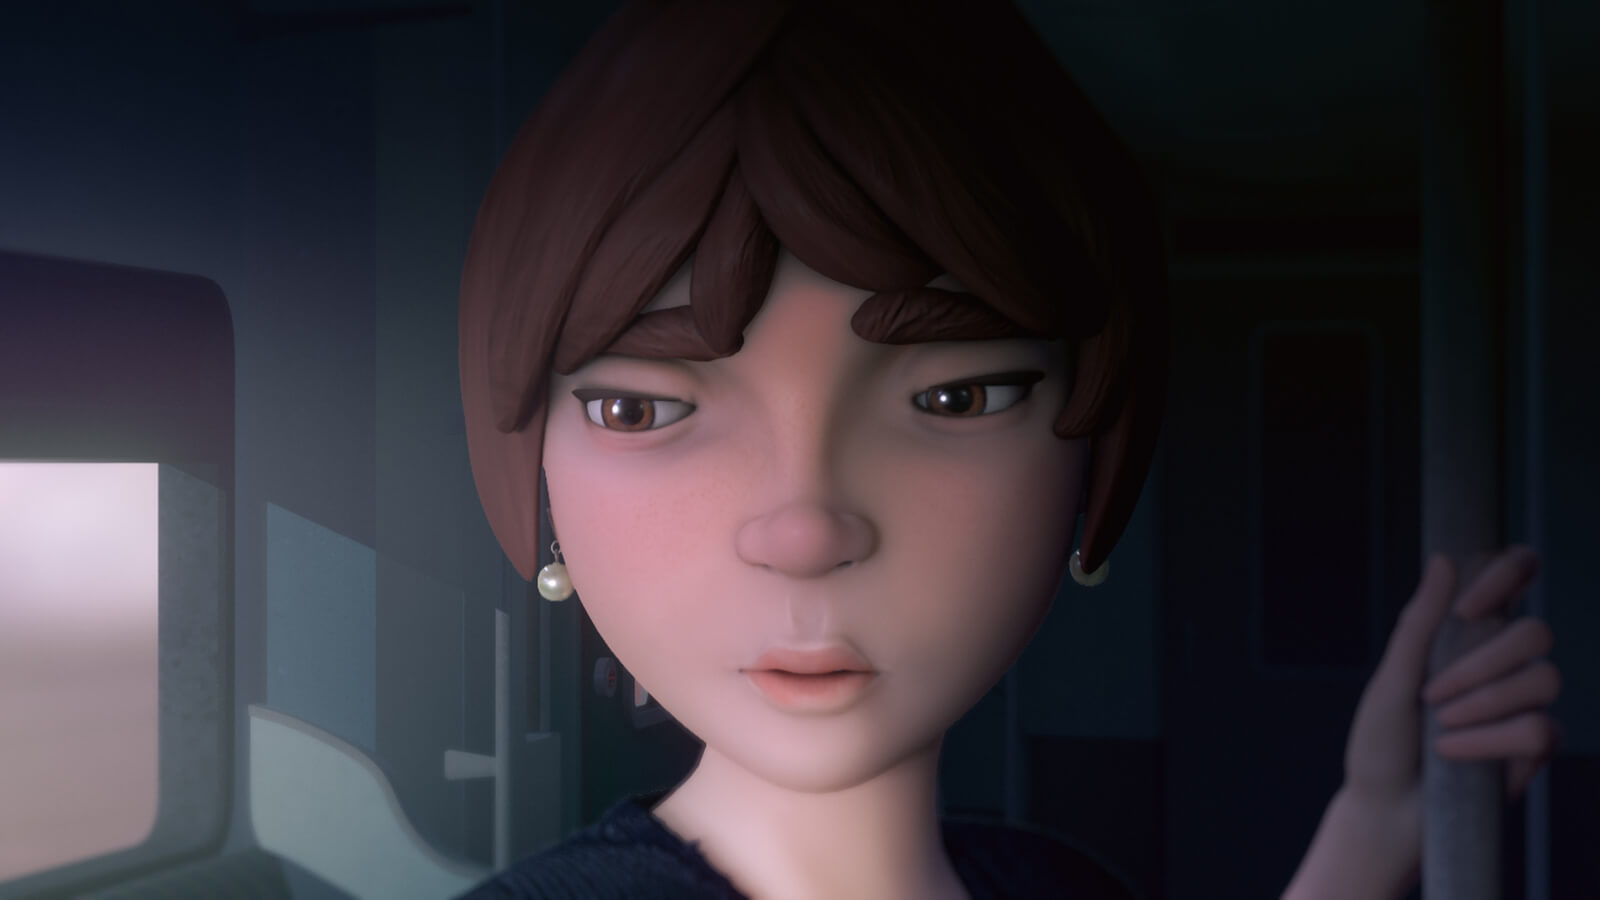 CG image of a closeup on a woman's face as she stands in a train car. Her expression is downcast, but muted.